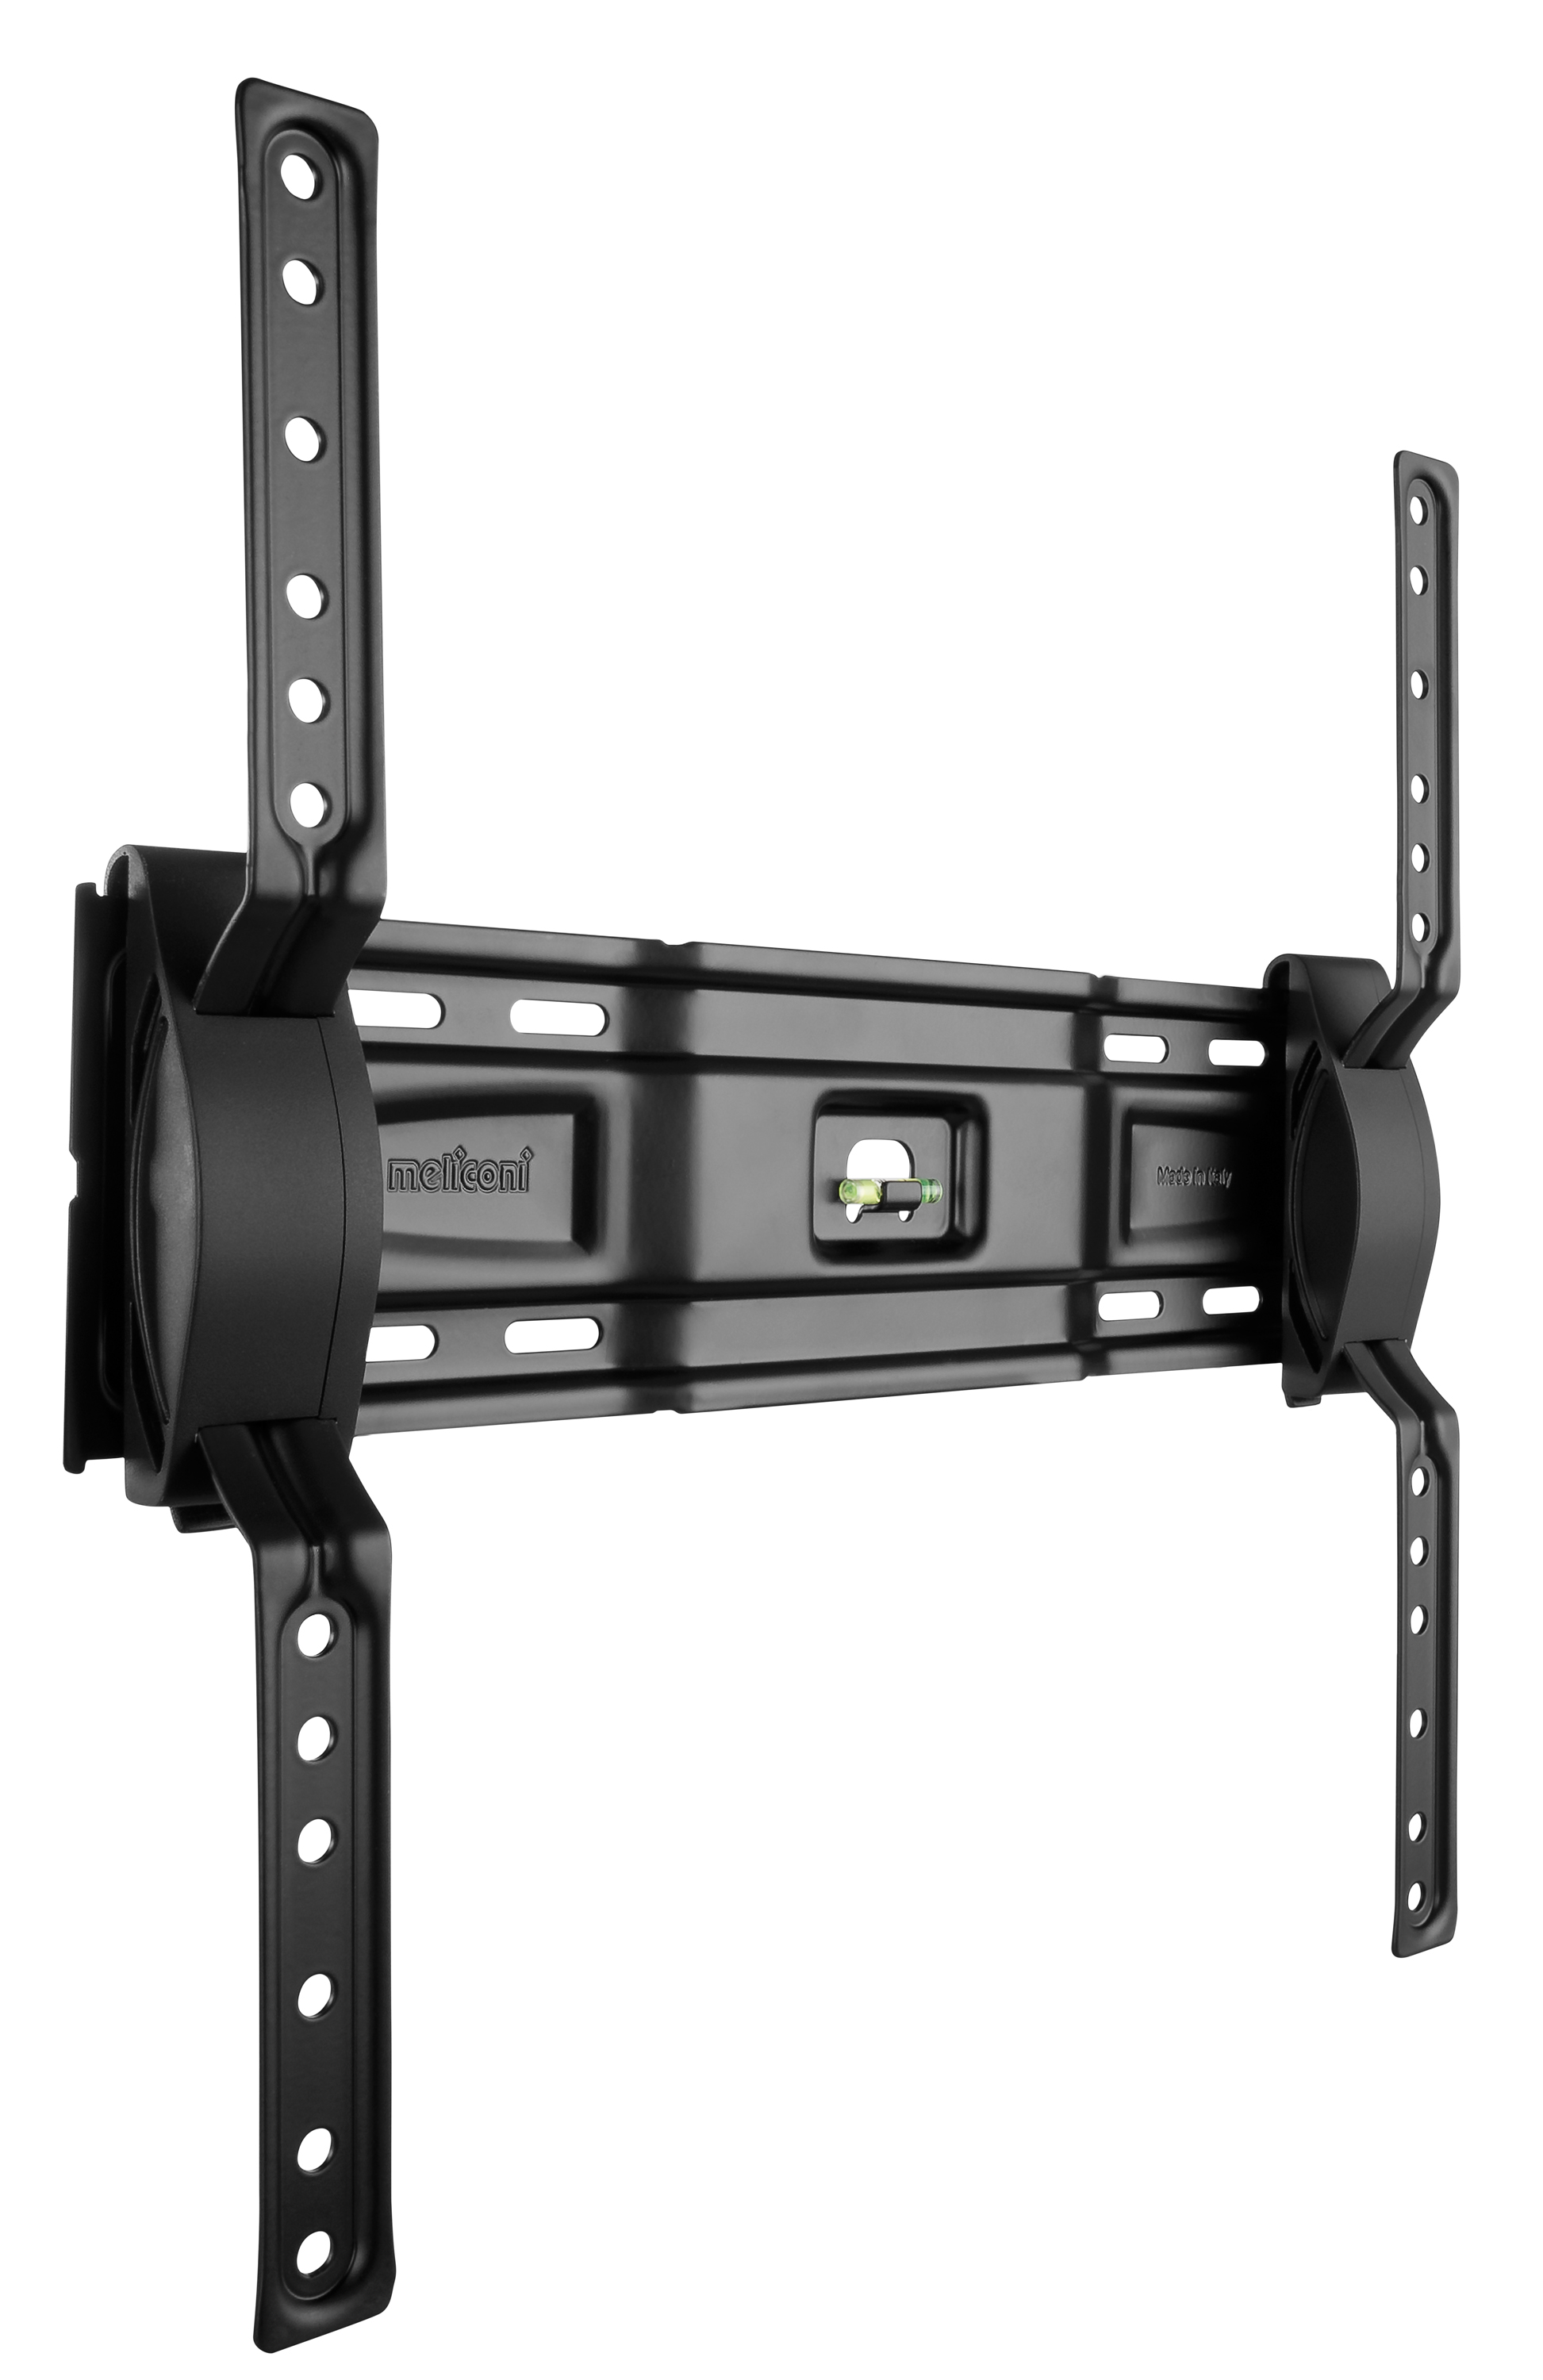 Slimstyle 400 ST, wall bracket for 40-50 inch tv, black